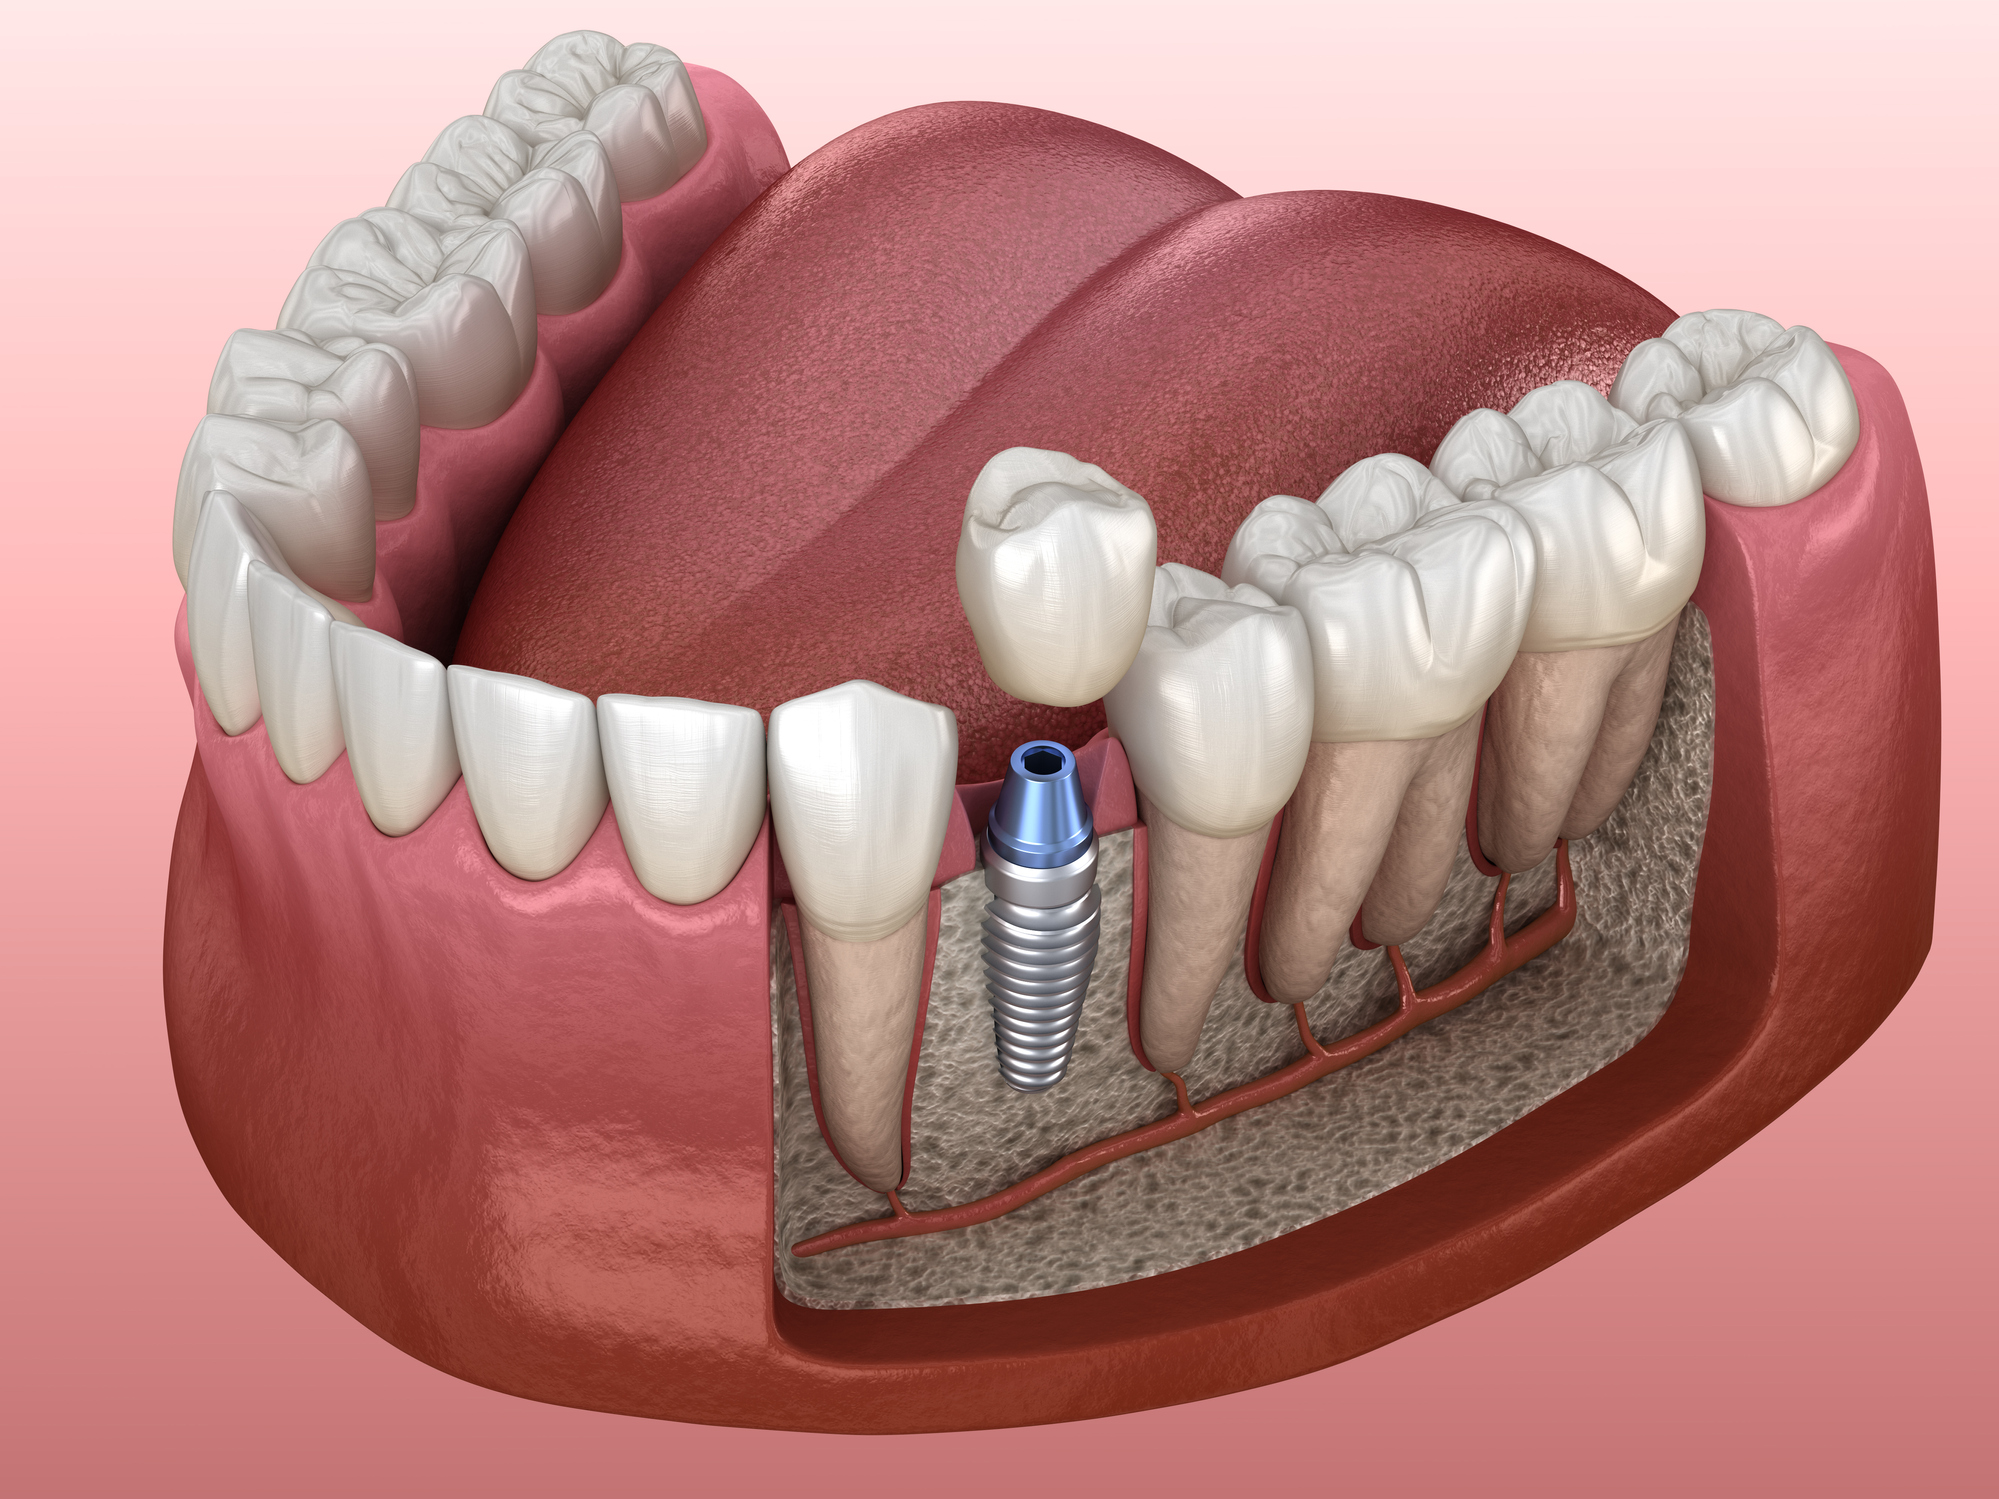 Are dental implants an option if you have severe bone loss?